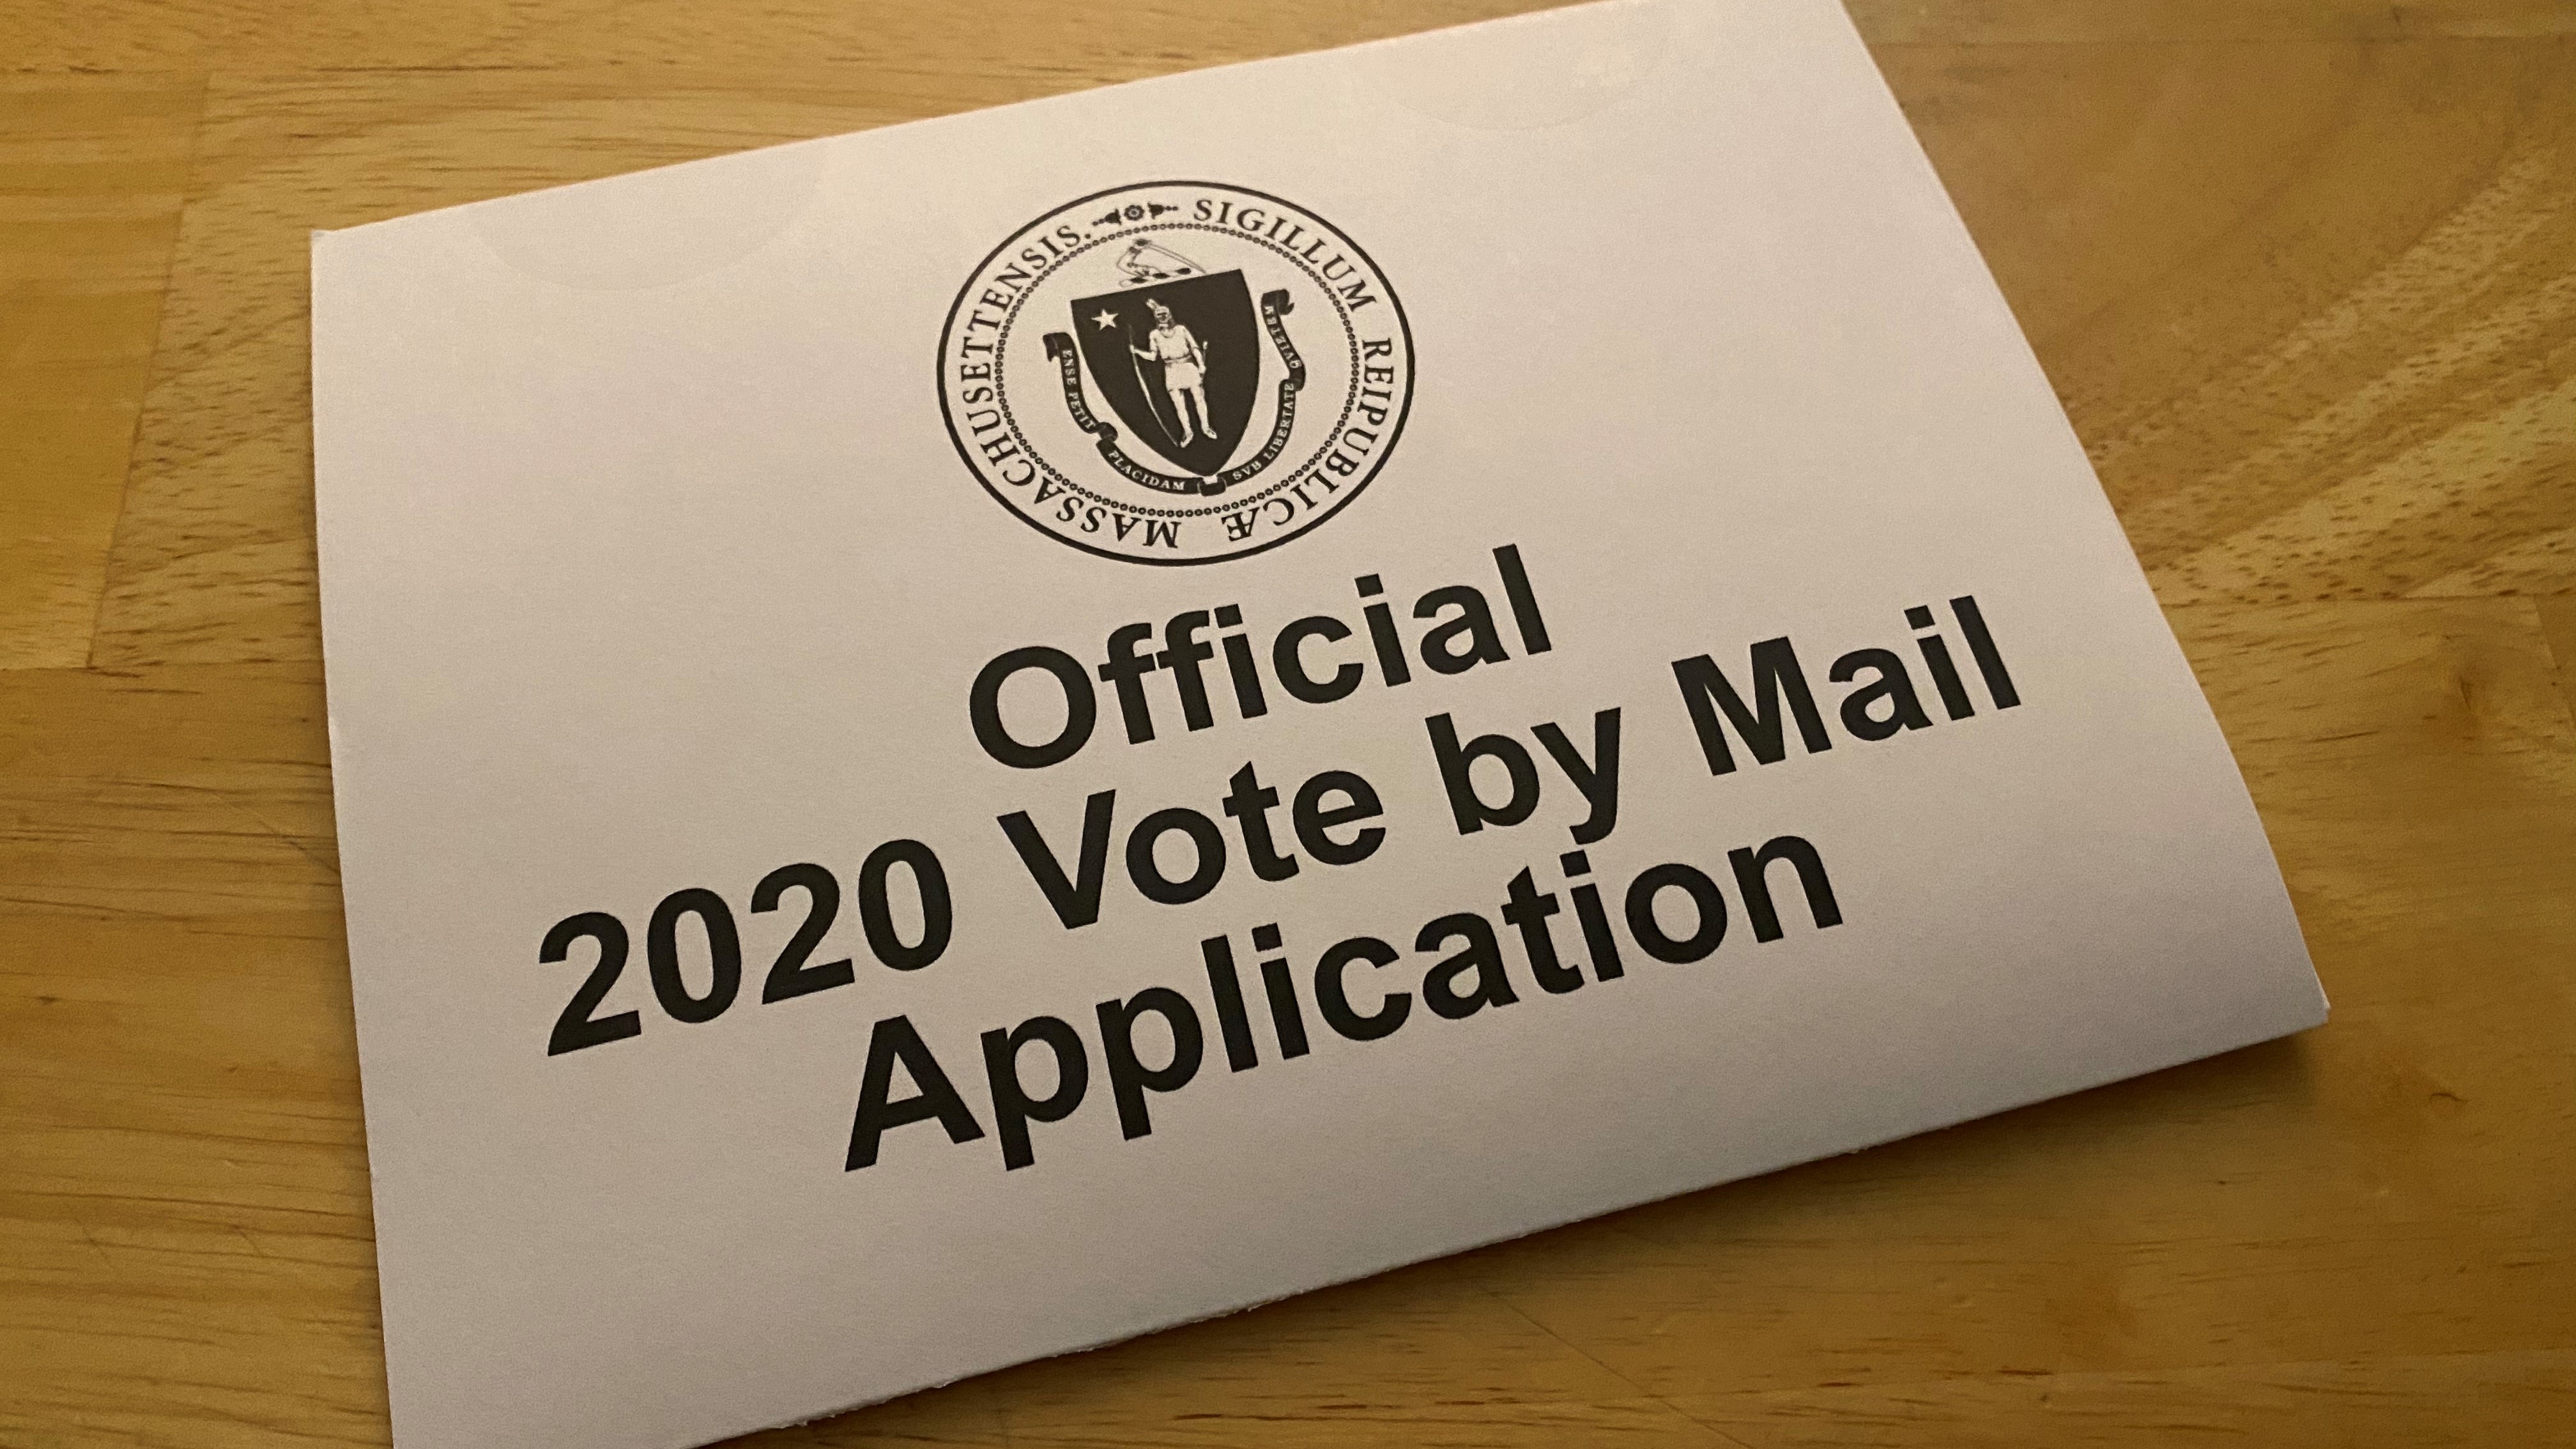 Mass. voters can now request mailin ballots online Boston 25 News